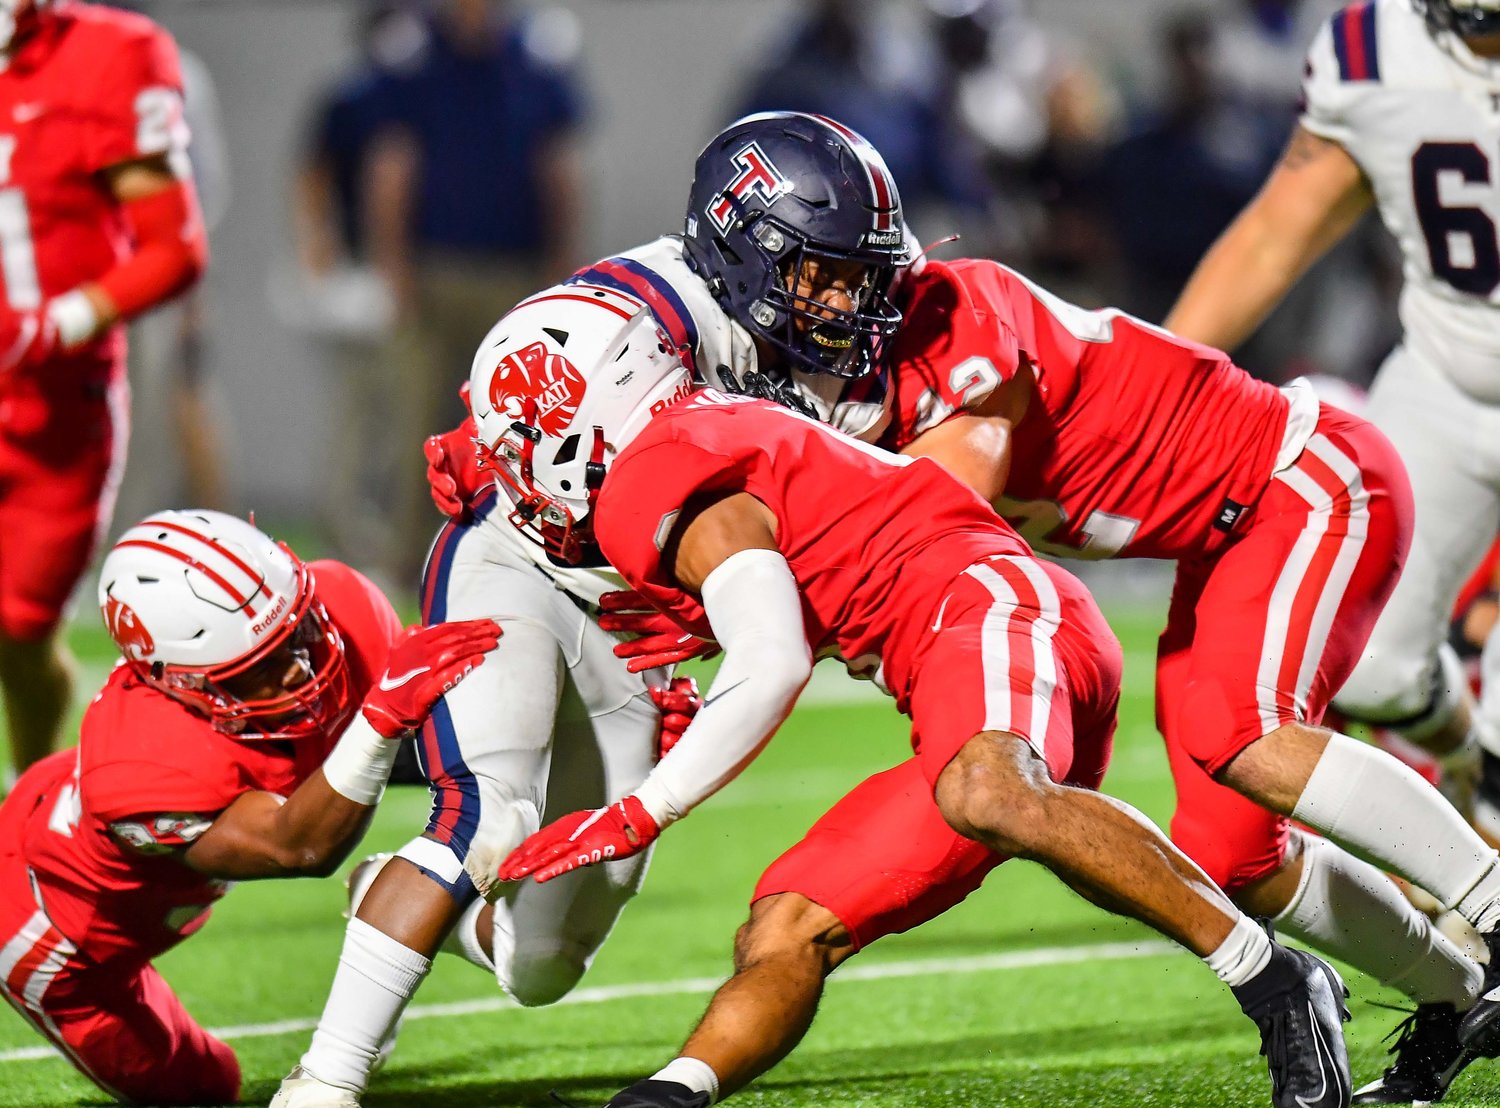 Katy, Tx. Oct 1, 2021:  Katy's defense holds off Tompkins  during a conference game between Katy Tigers and Tompkins Tompkins Falcons at Legacy Stadium. (Photo by Mark Goodman / Katy Times)